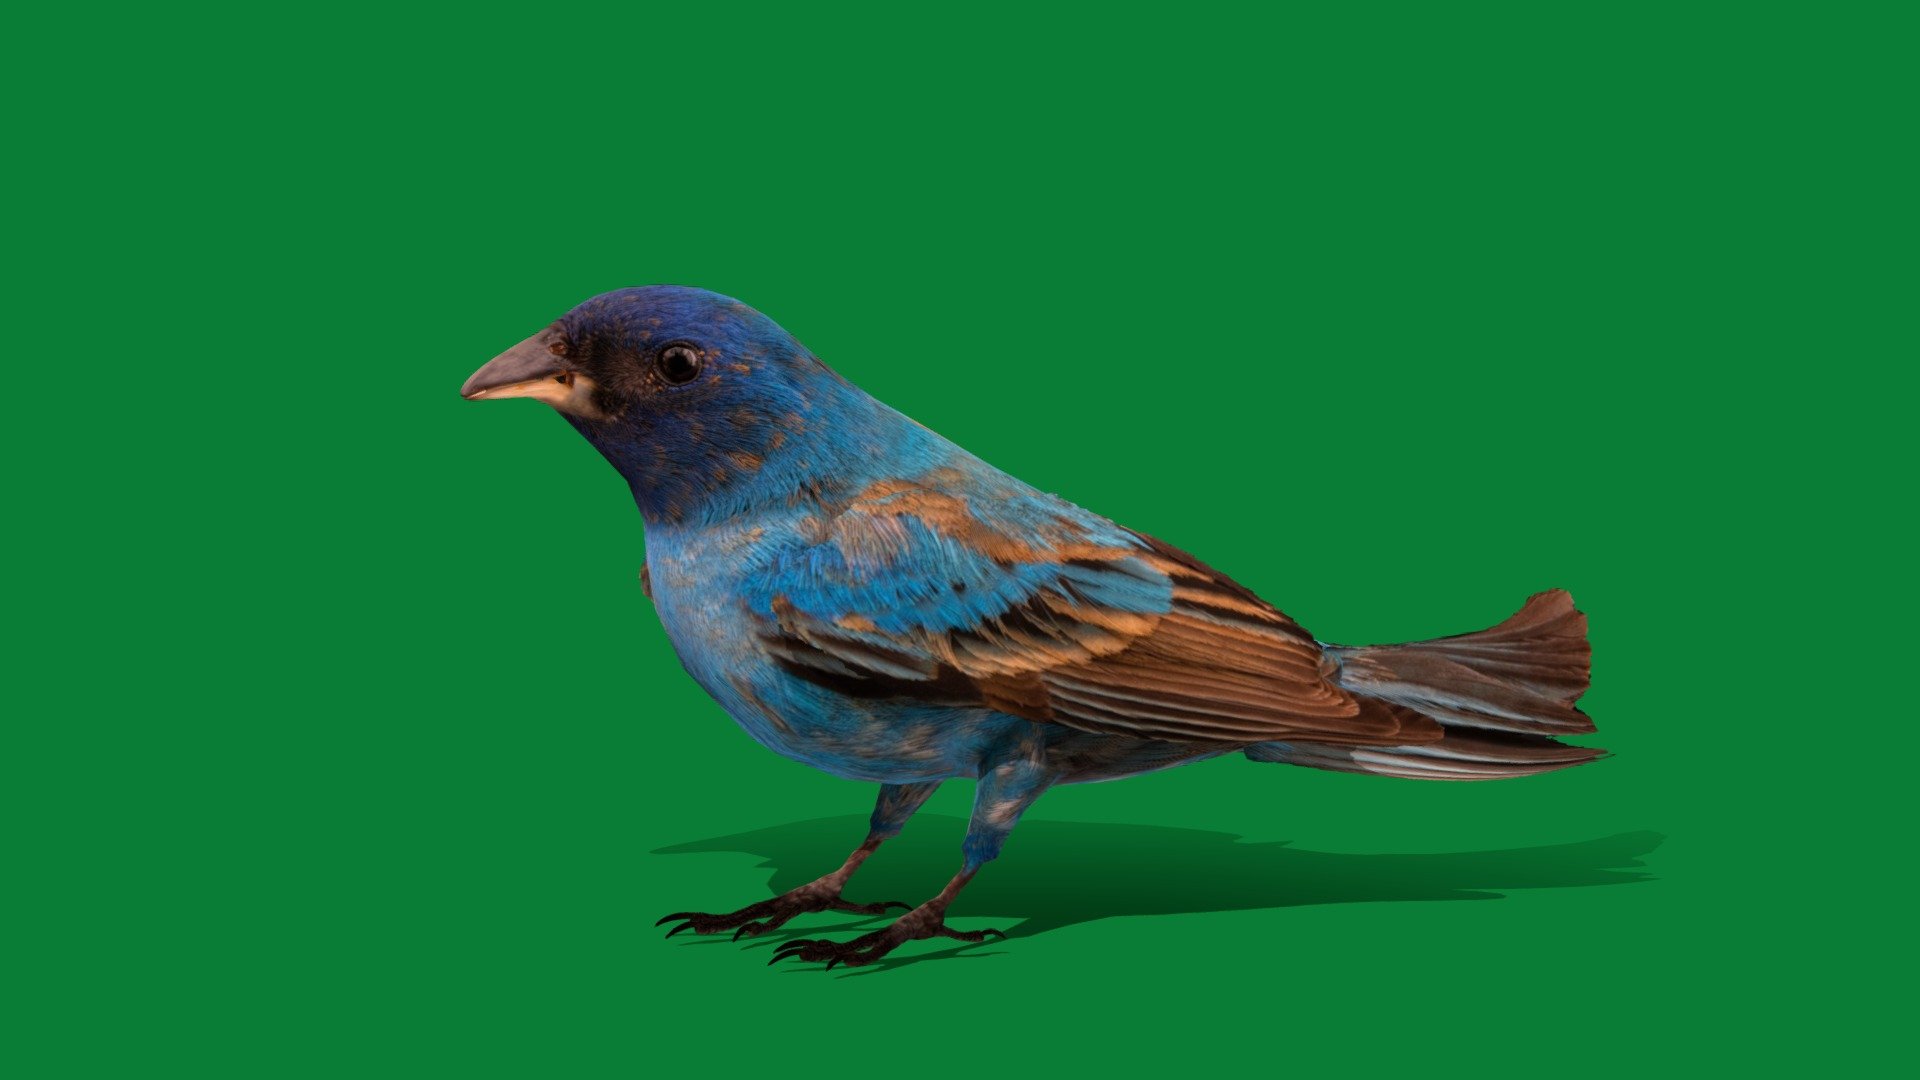 Indigo Bunting Bird(blue canaries)seed-eating bird

Passerina cyanea Animal Bird(Cardinalidae)Cute,Pet,migratory bird

1 Draw Calls

LowPoly

Game Ready(Assets)

Subdivision Surface Ready

Single-Animations 

4K PBR Textures 1 Material

Unreal/Unity FBX 

Blend File 3.6.5 LTS/4 Plus

USDZ File(AR Ready). Real Scale Dimension (Xcode ,Reality Composer, Keynote Ready)

Textures File


GLB/GlTF  (Unreal 5.1 Plus Native Support,Godot,Spark AR,Lens Studio,Effector,Spline,Play Canvas,Omniverse,GDevelop-5,BuildBox)




Triangles -15092



Faces -9840

Edges -18523

Vertices -8697

Diffuse,Metallic,Roughness,Normal Map,Specular Map,AO

The indigo bunting (Passerina cyanea) is a small, migratory bird that eats seeds and belongs to the cardinal family. They are 4.5–5.9 inches long and weigh about half an ounce. Males are slightly larger than females and are bright blue with a darker head and silver-gray bill. Females are sparrow-sized.It is migratory 3d model